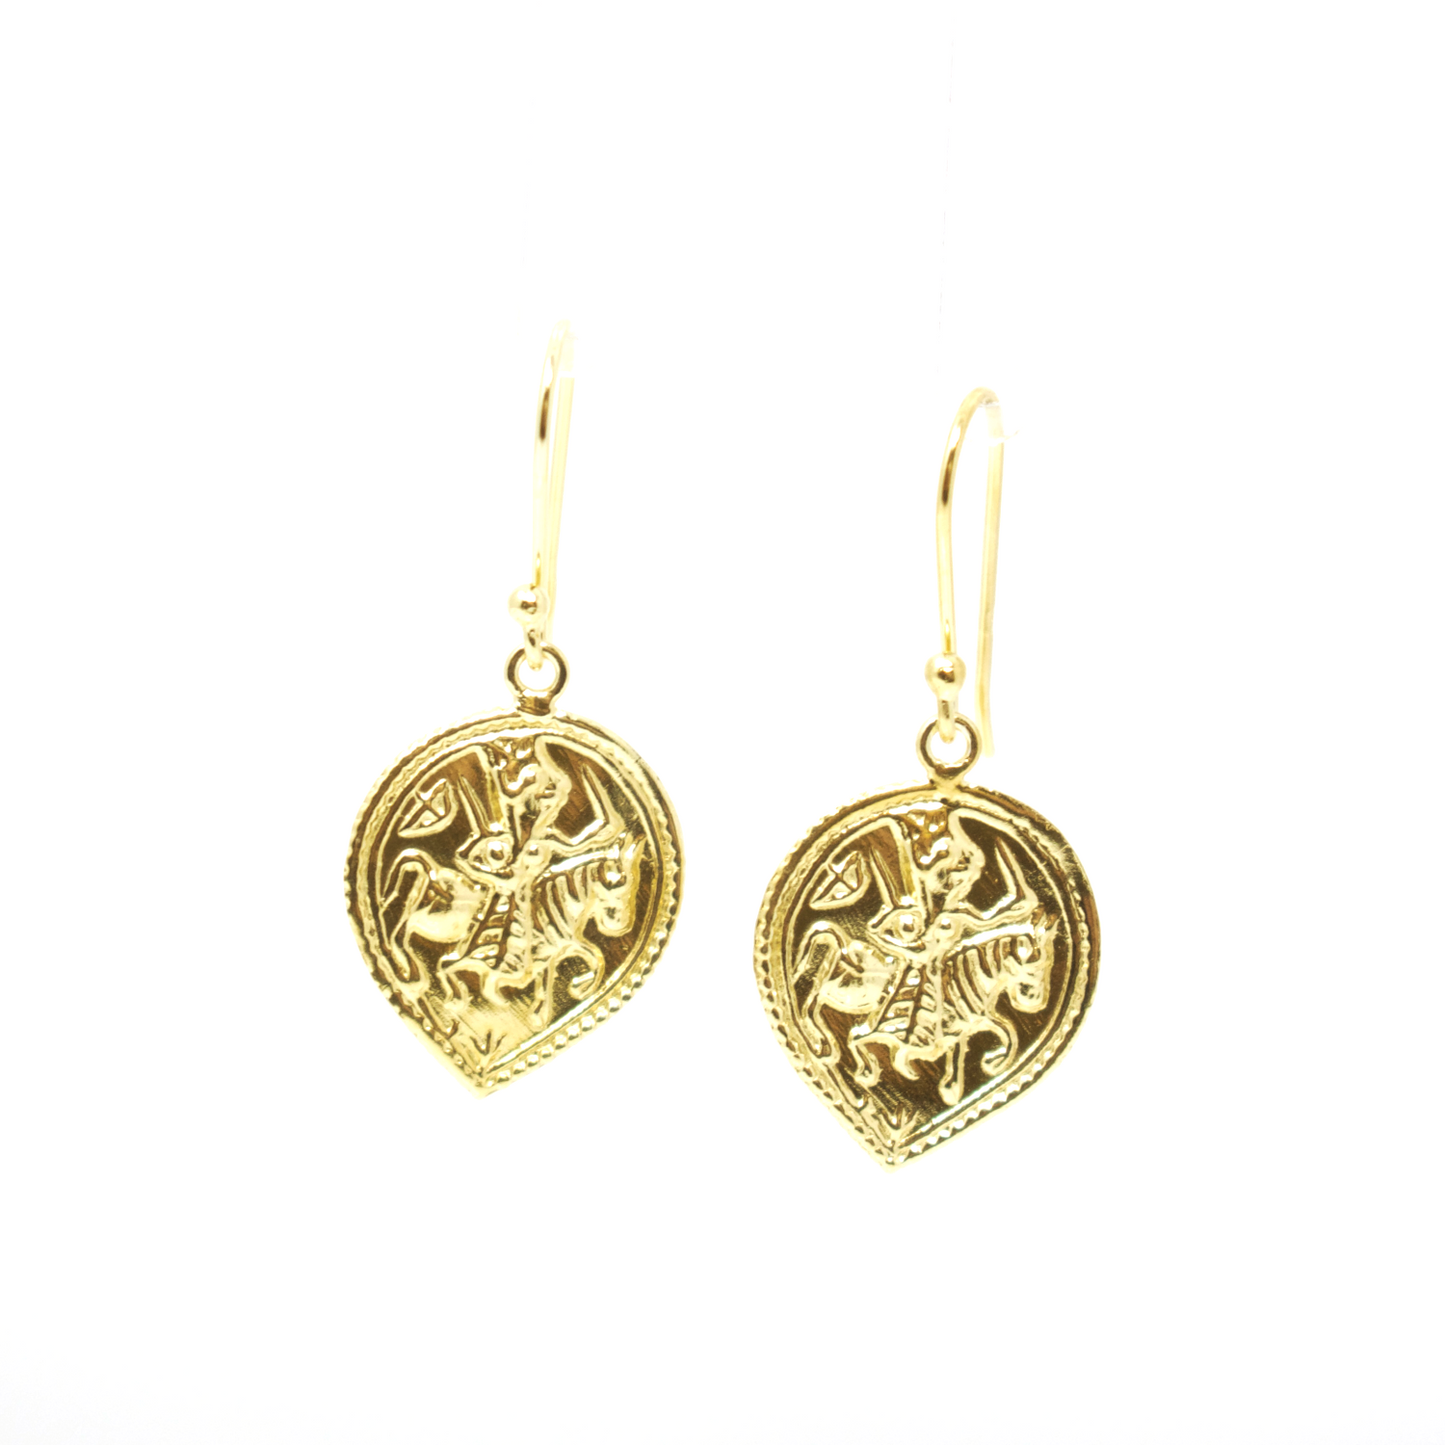 Horse & Solider Coin Earrings